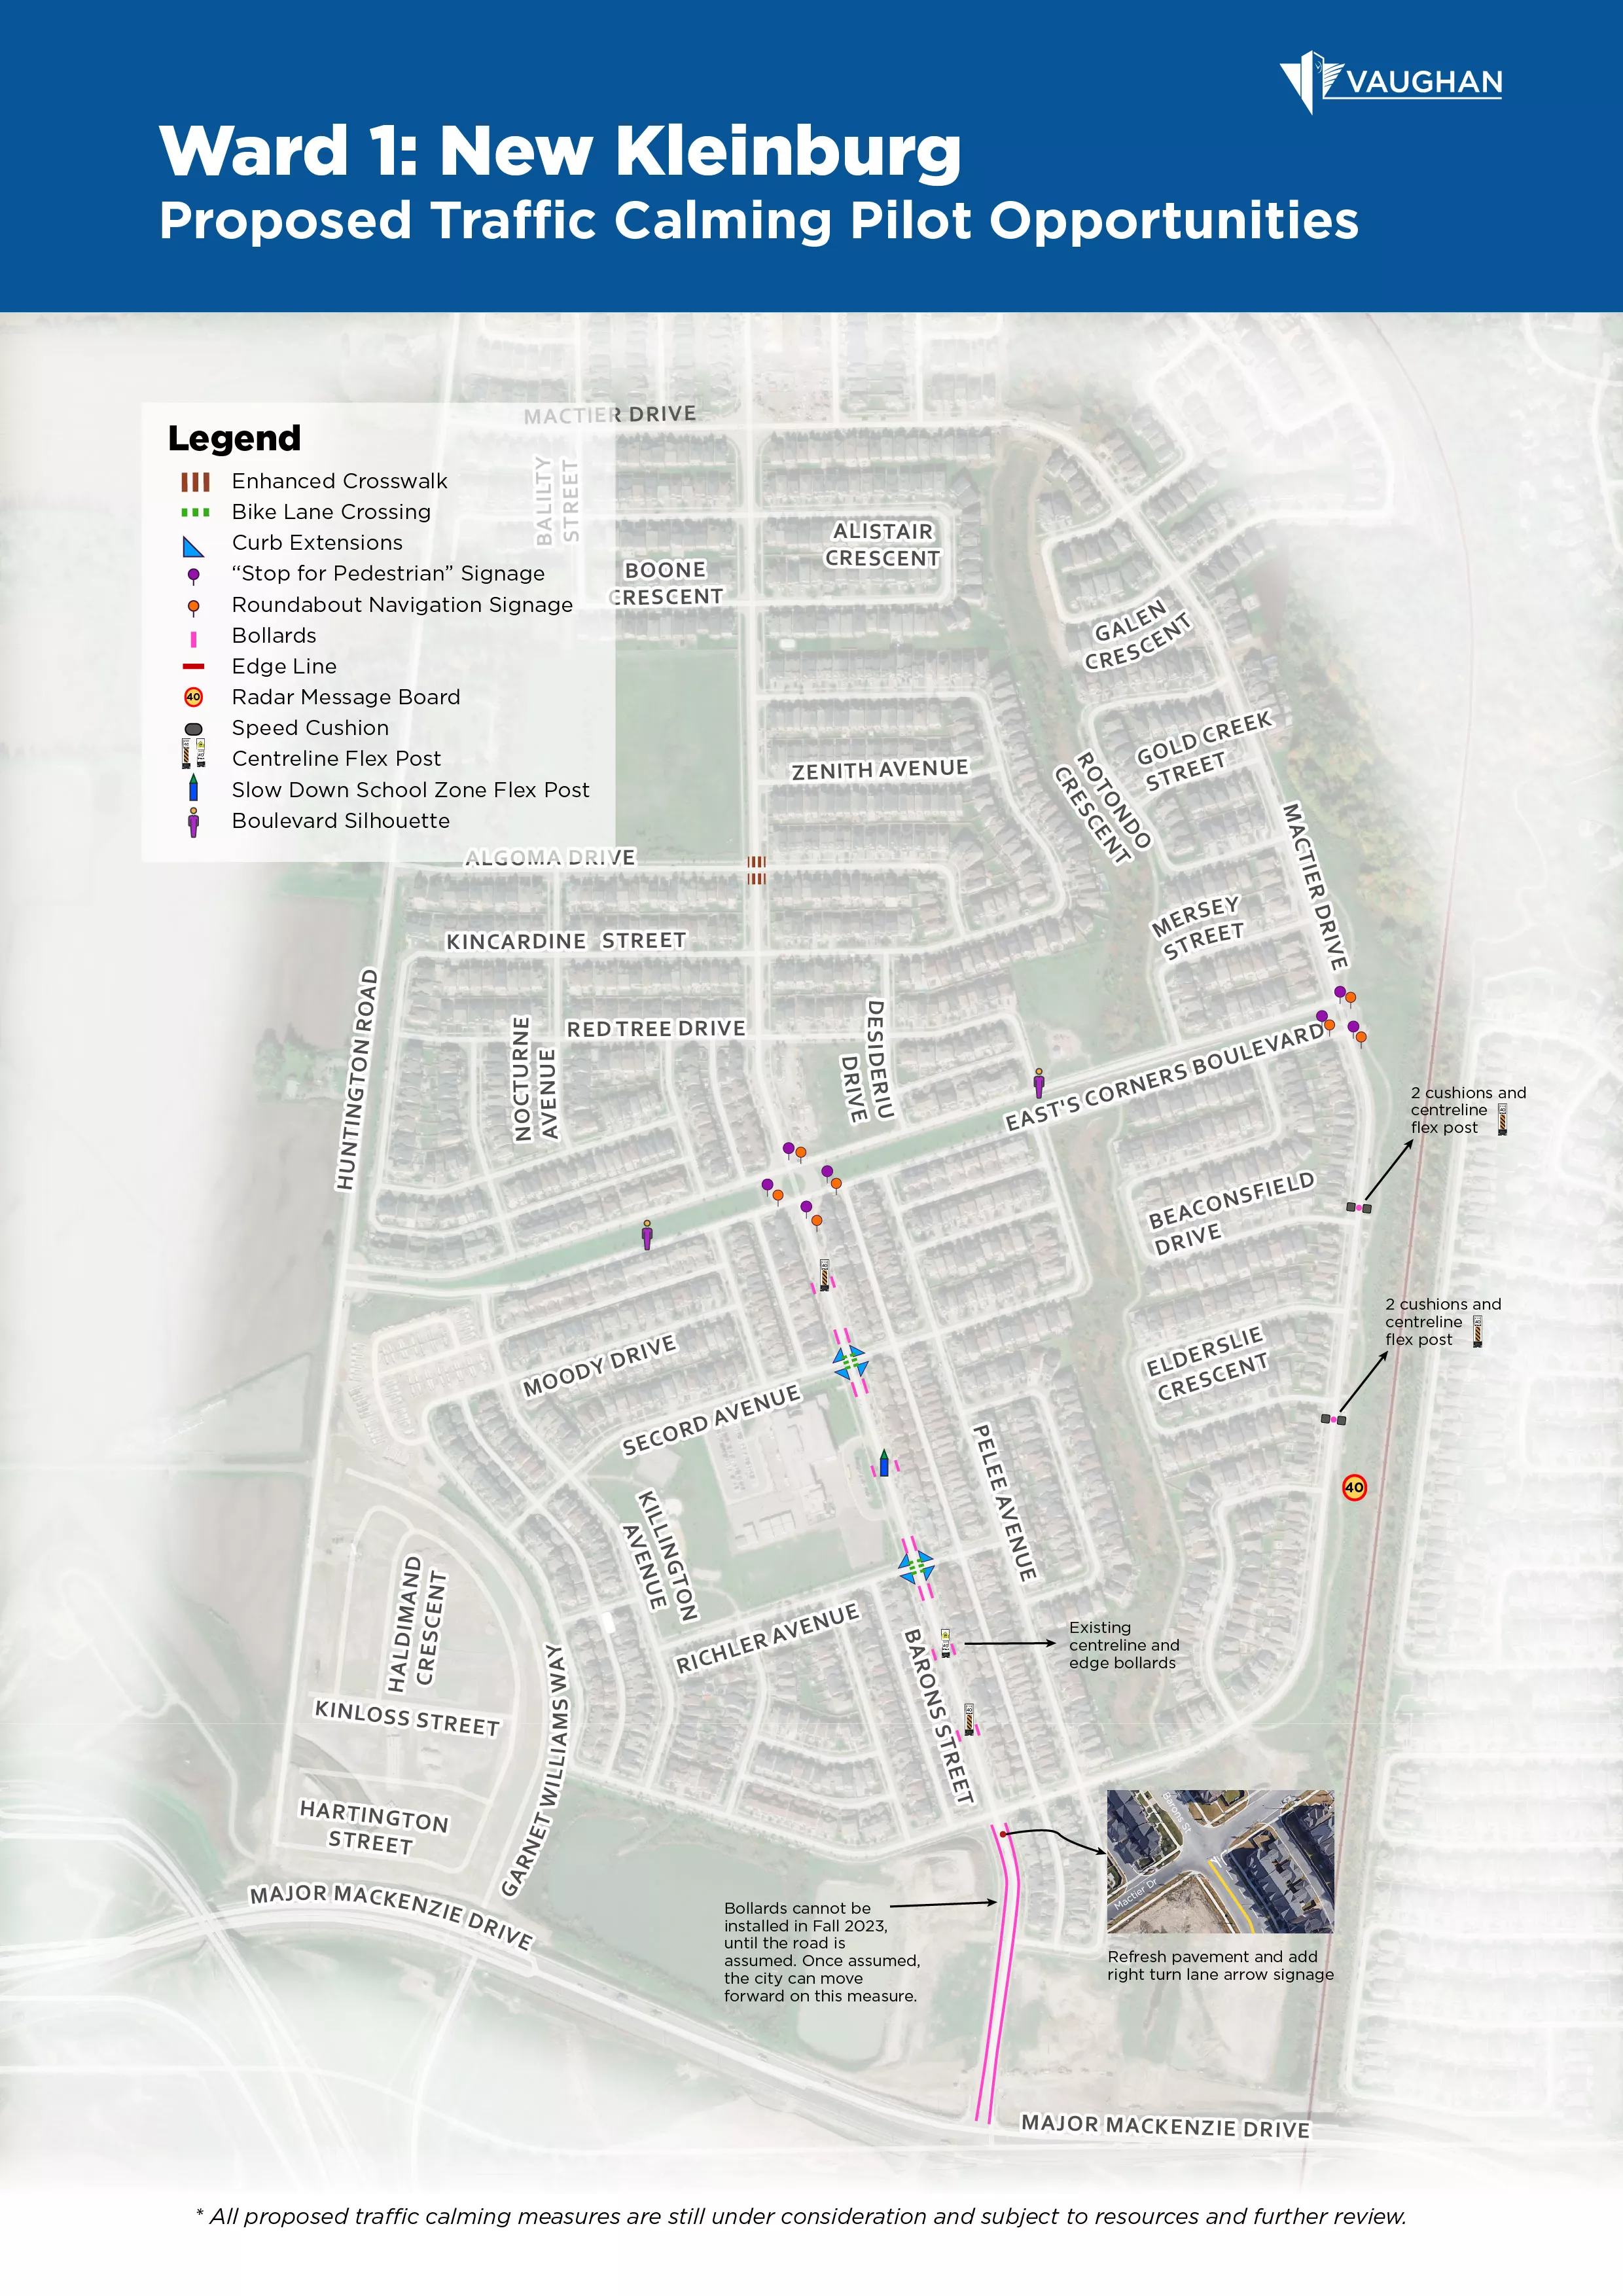 Map of New Kleinburg with traffic calming measures